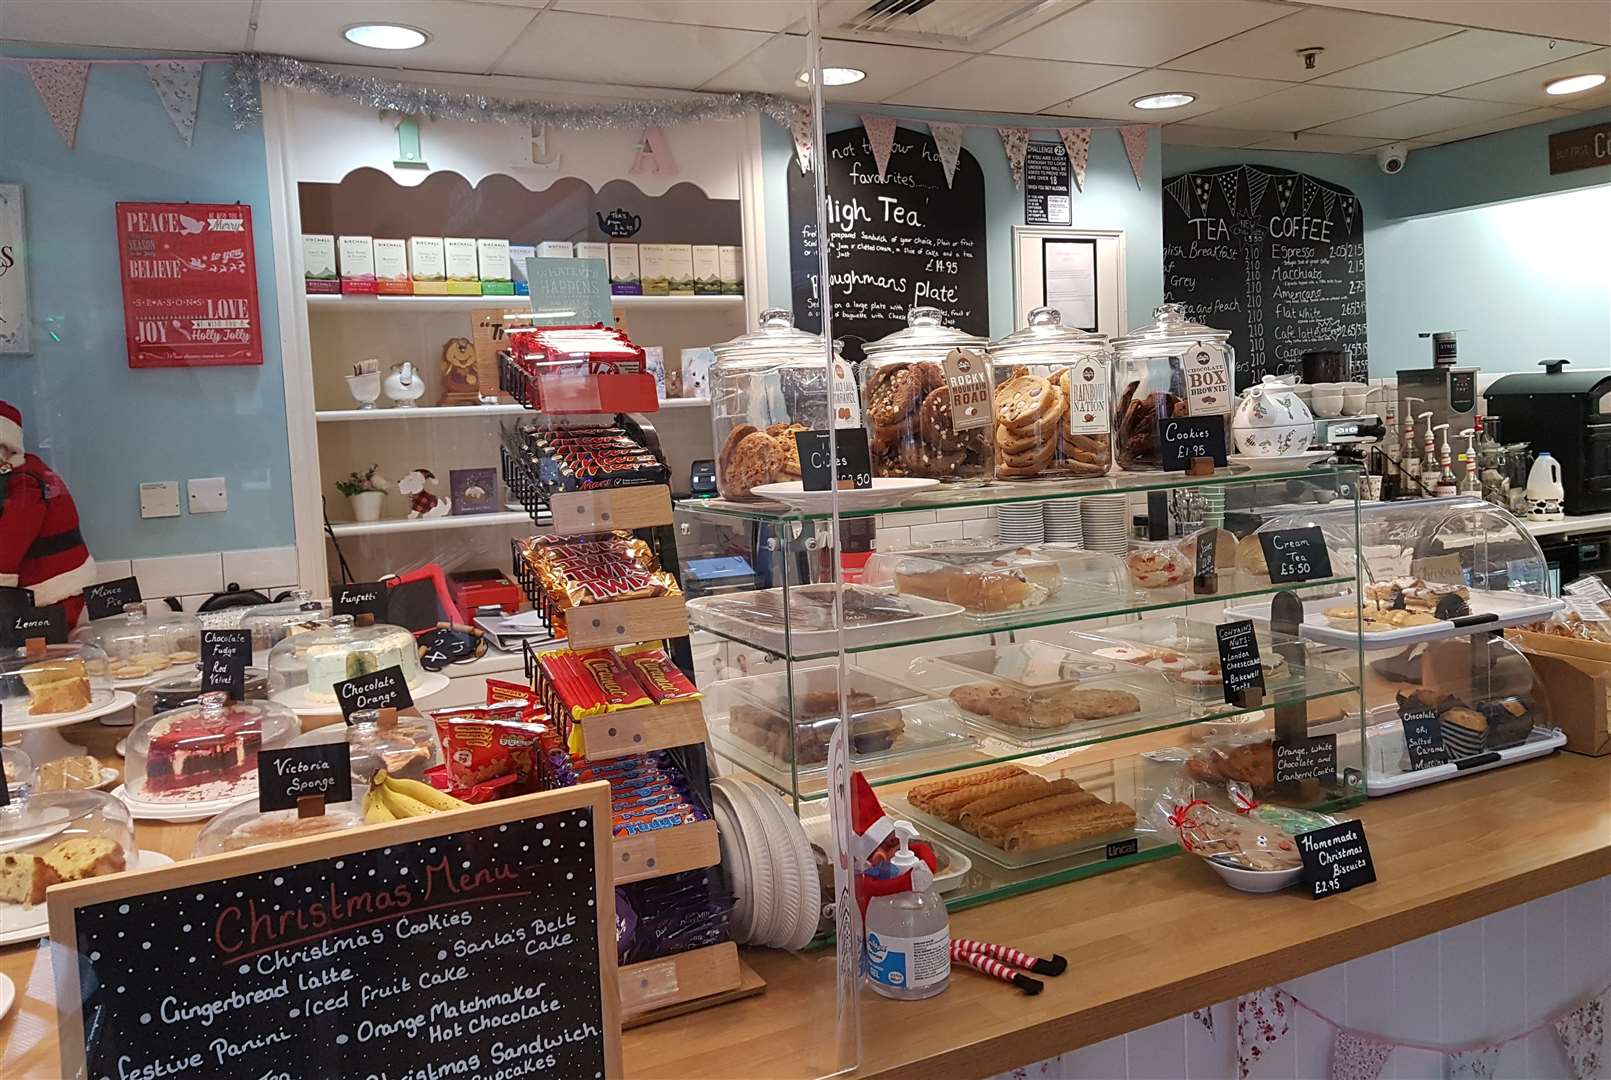 The same teas, coffees and cakes sold at The Little Teapot will be available to takeaway